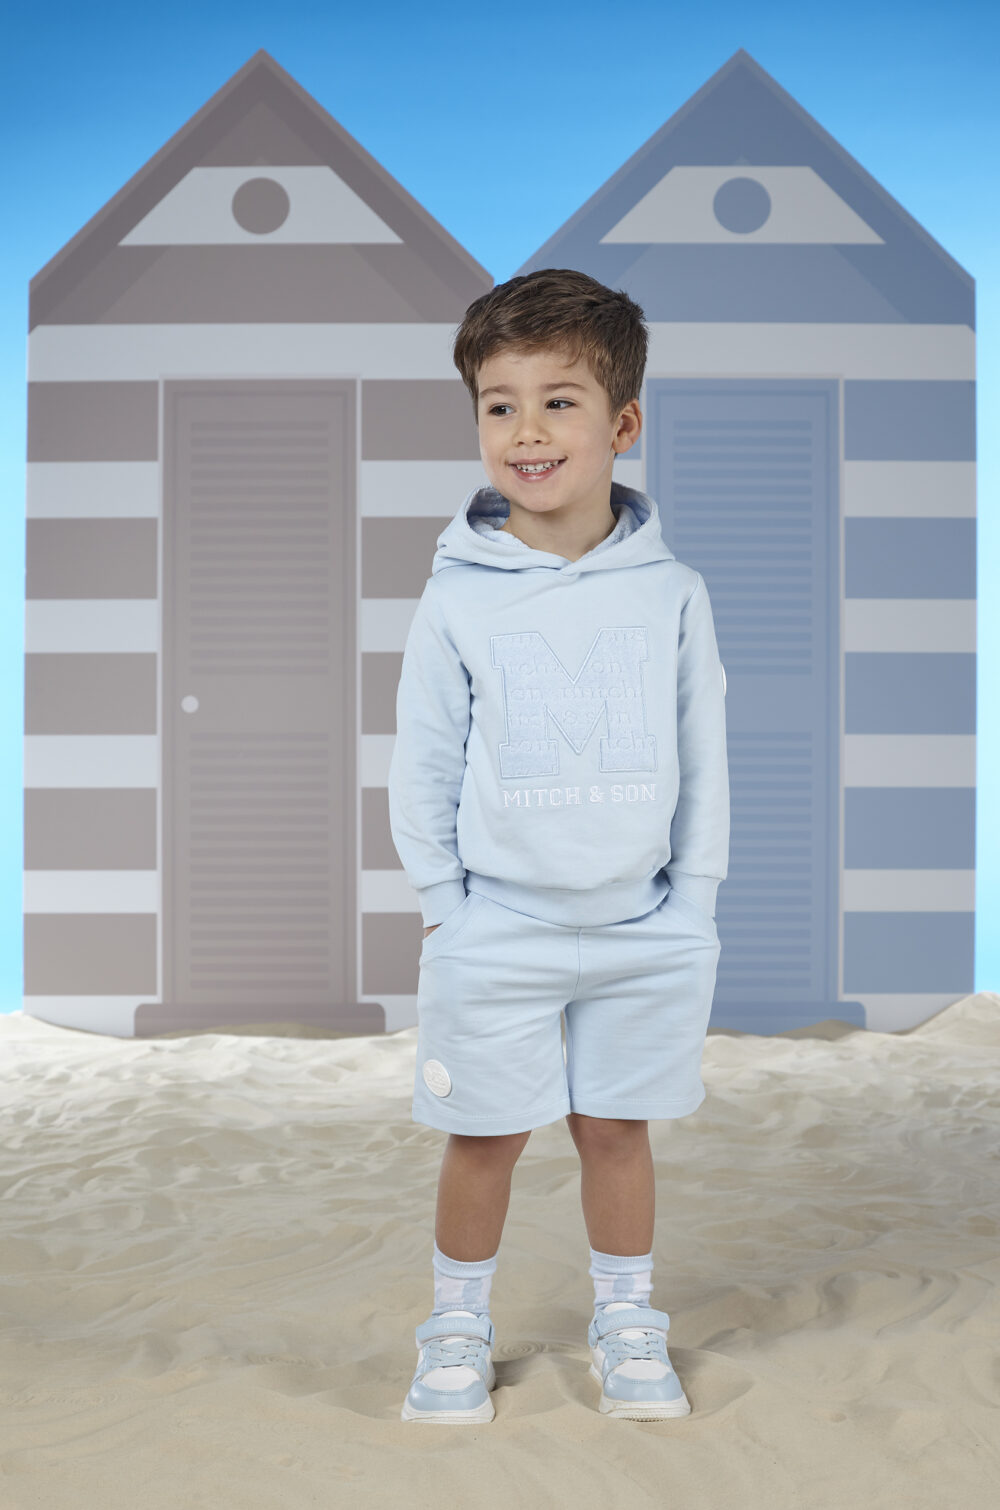 MITCH & SON Tommy Hooded Sweat Short Set